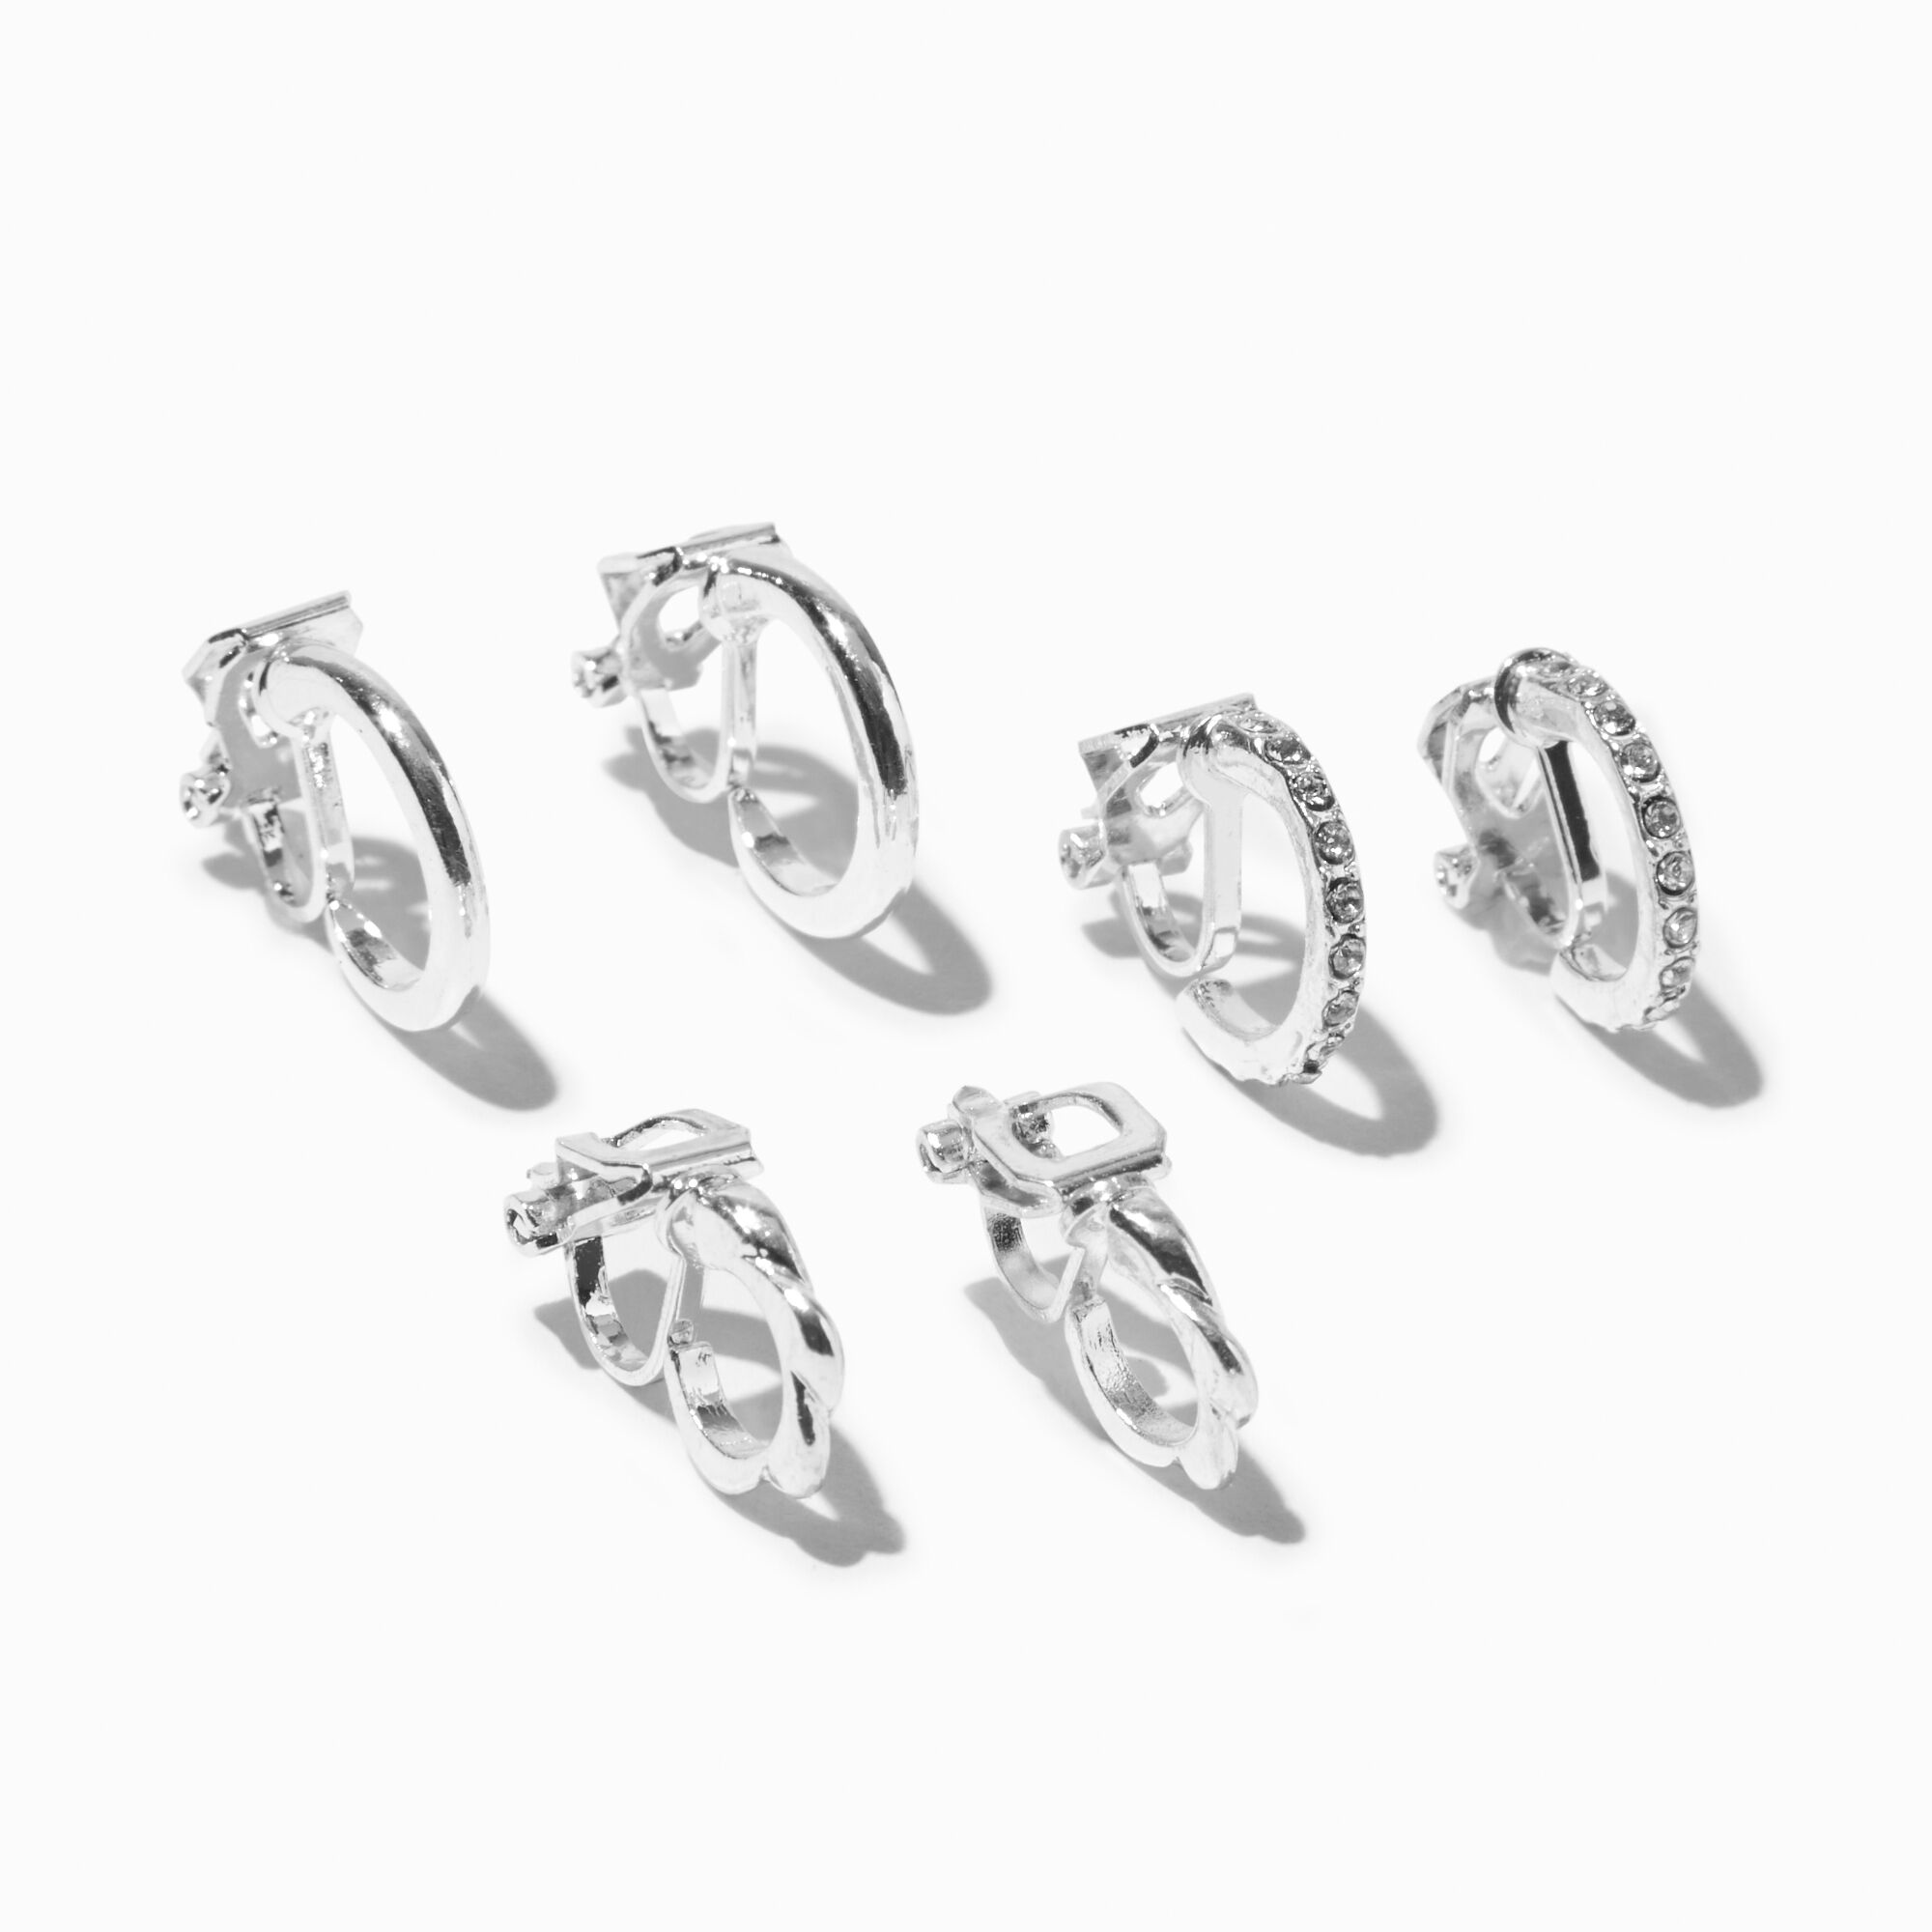 View Claires Tone Embellished Crystal Clip On Huggie Hoop Earrings 3 Pack Silver information